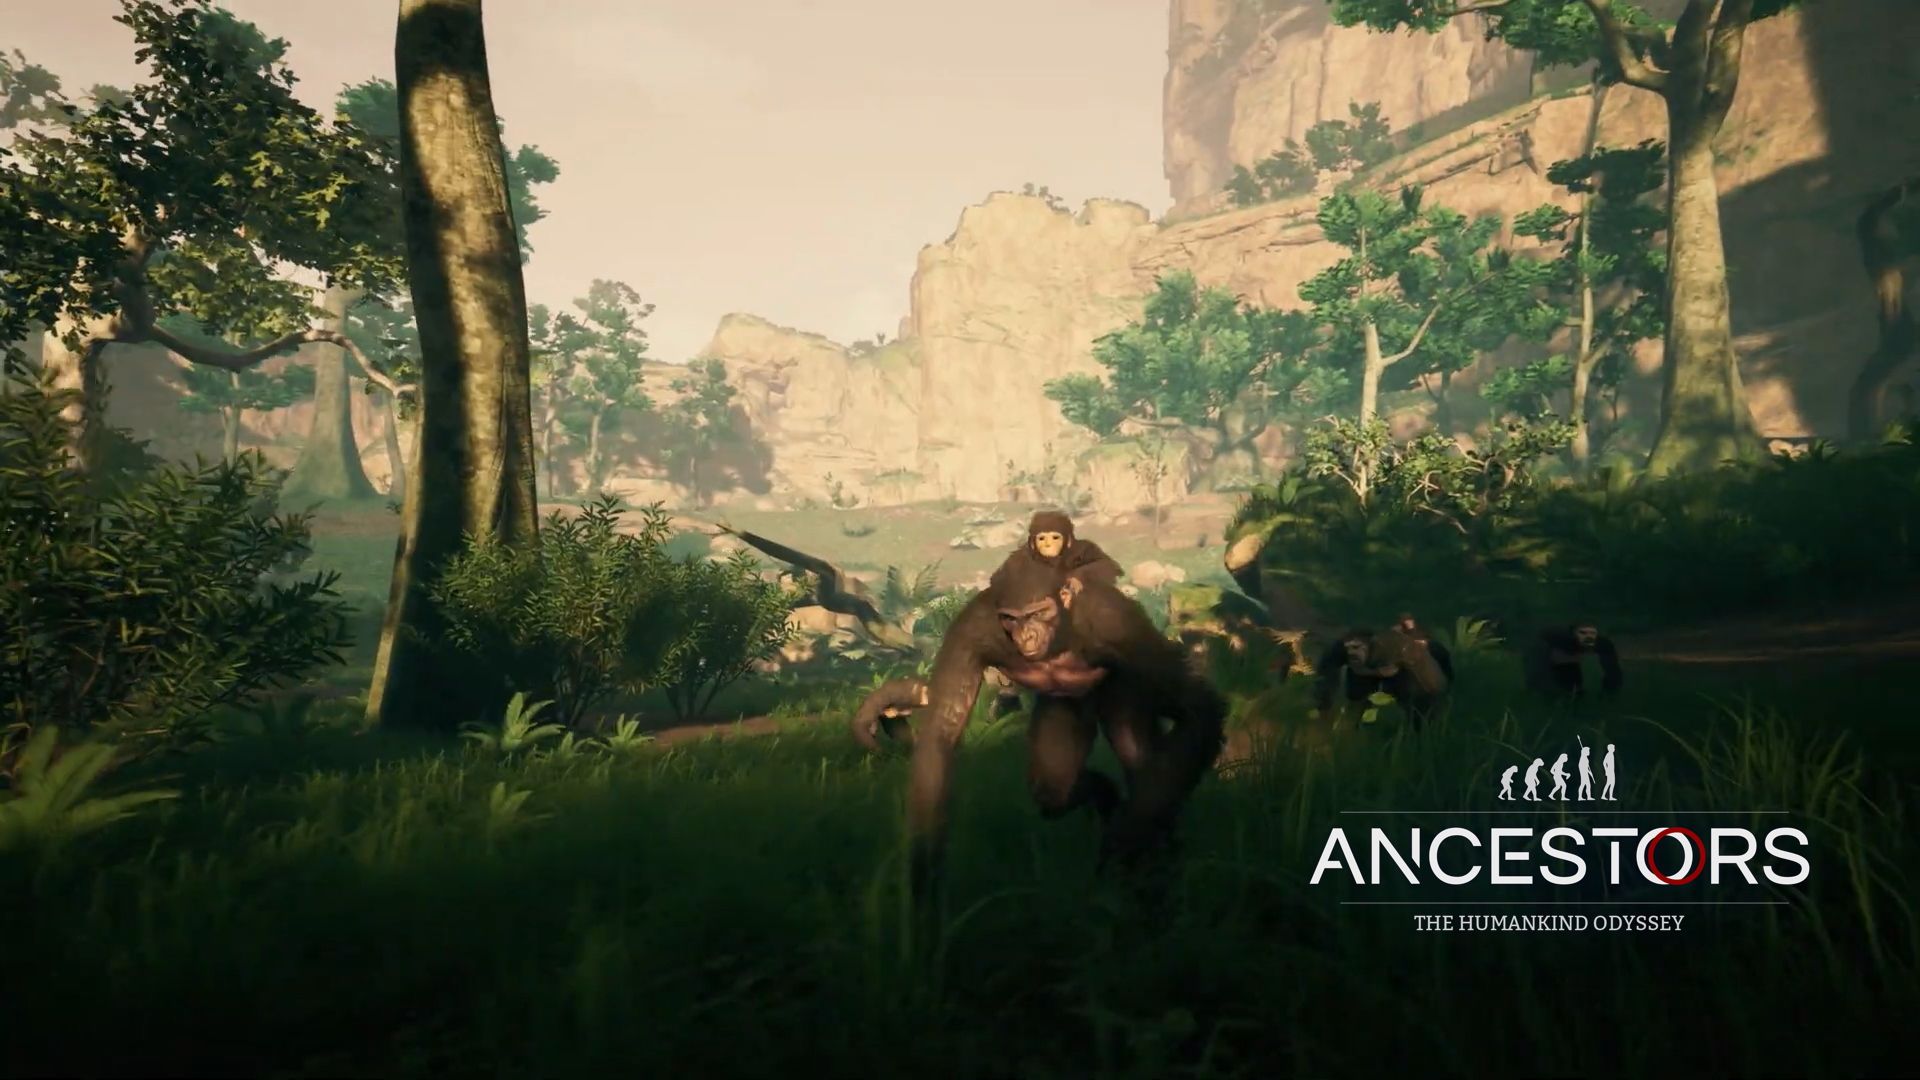 Third person open world survival game, Ancestors: The Humankind Odyssey coming to consoles this December 6